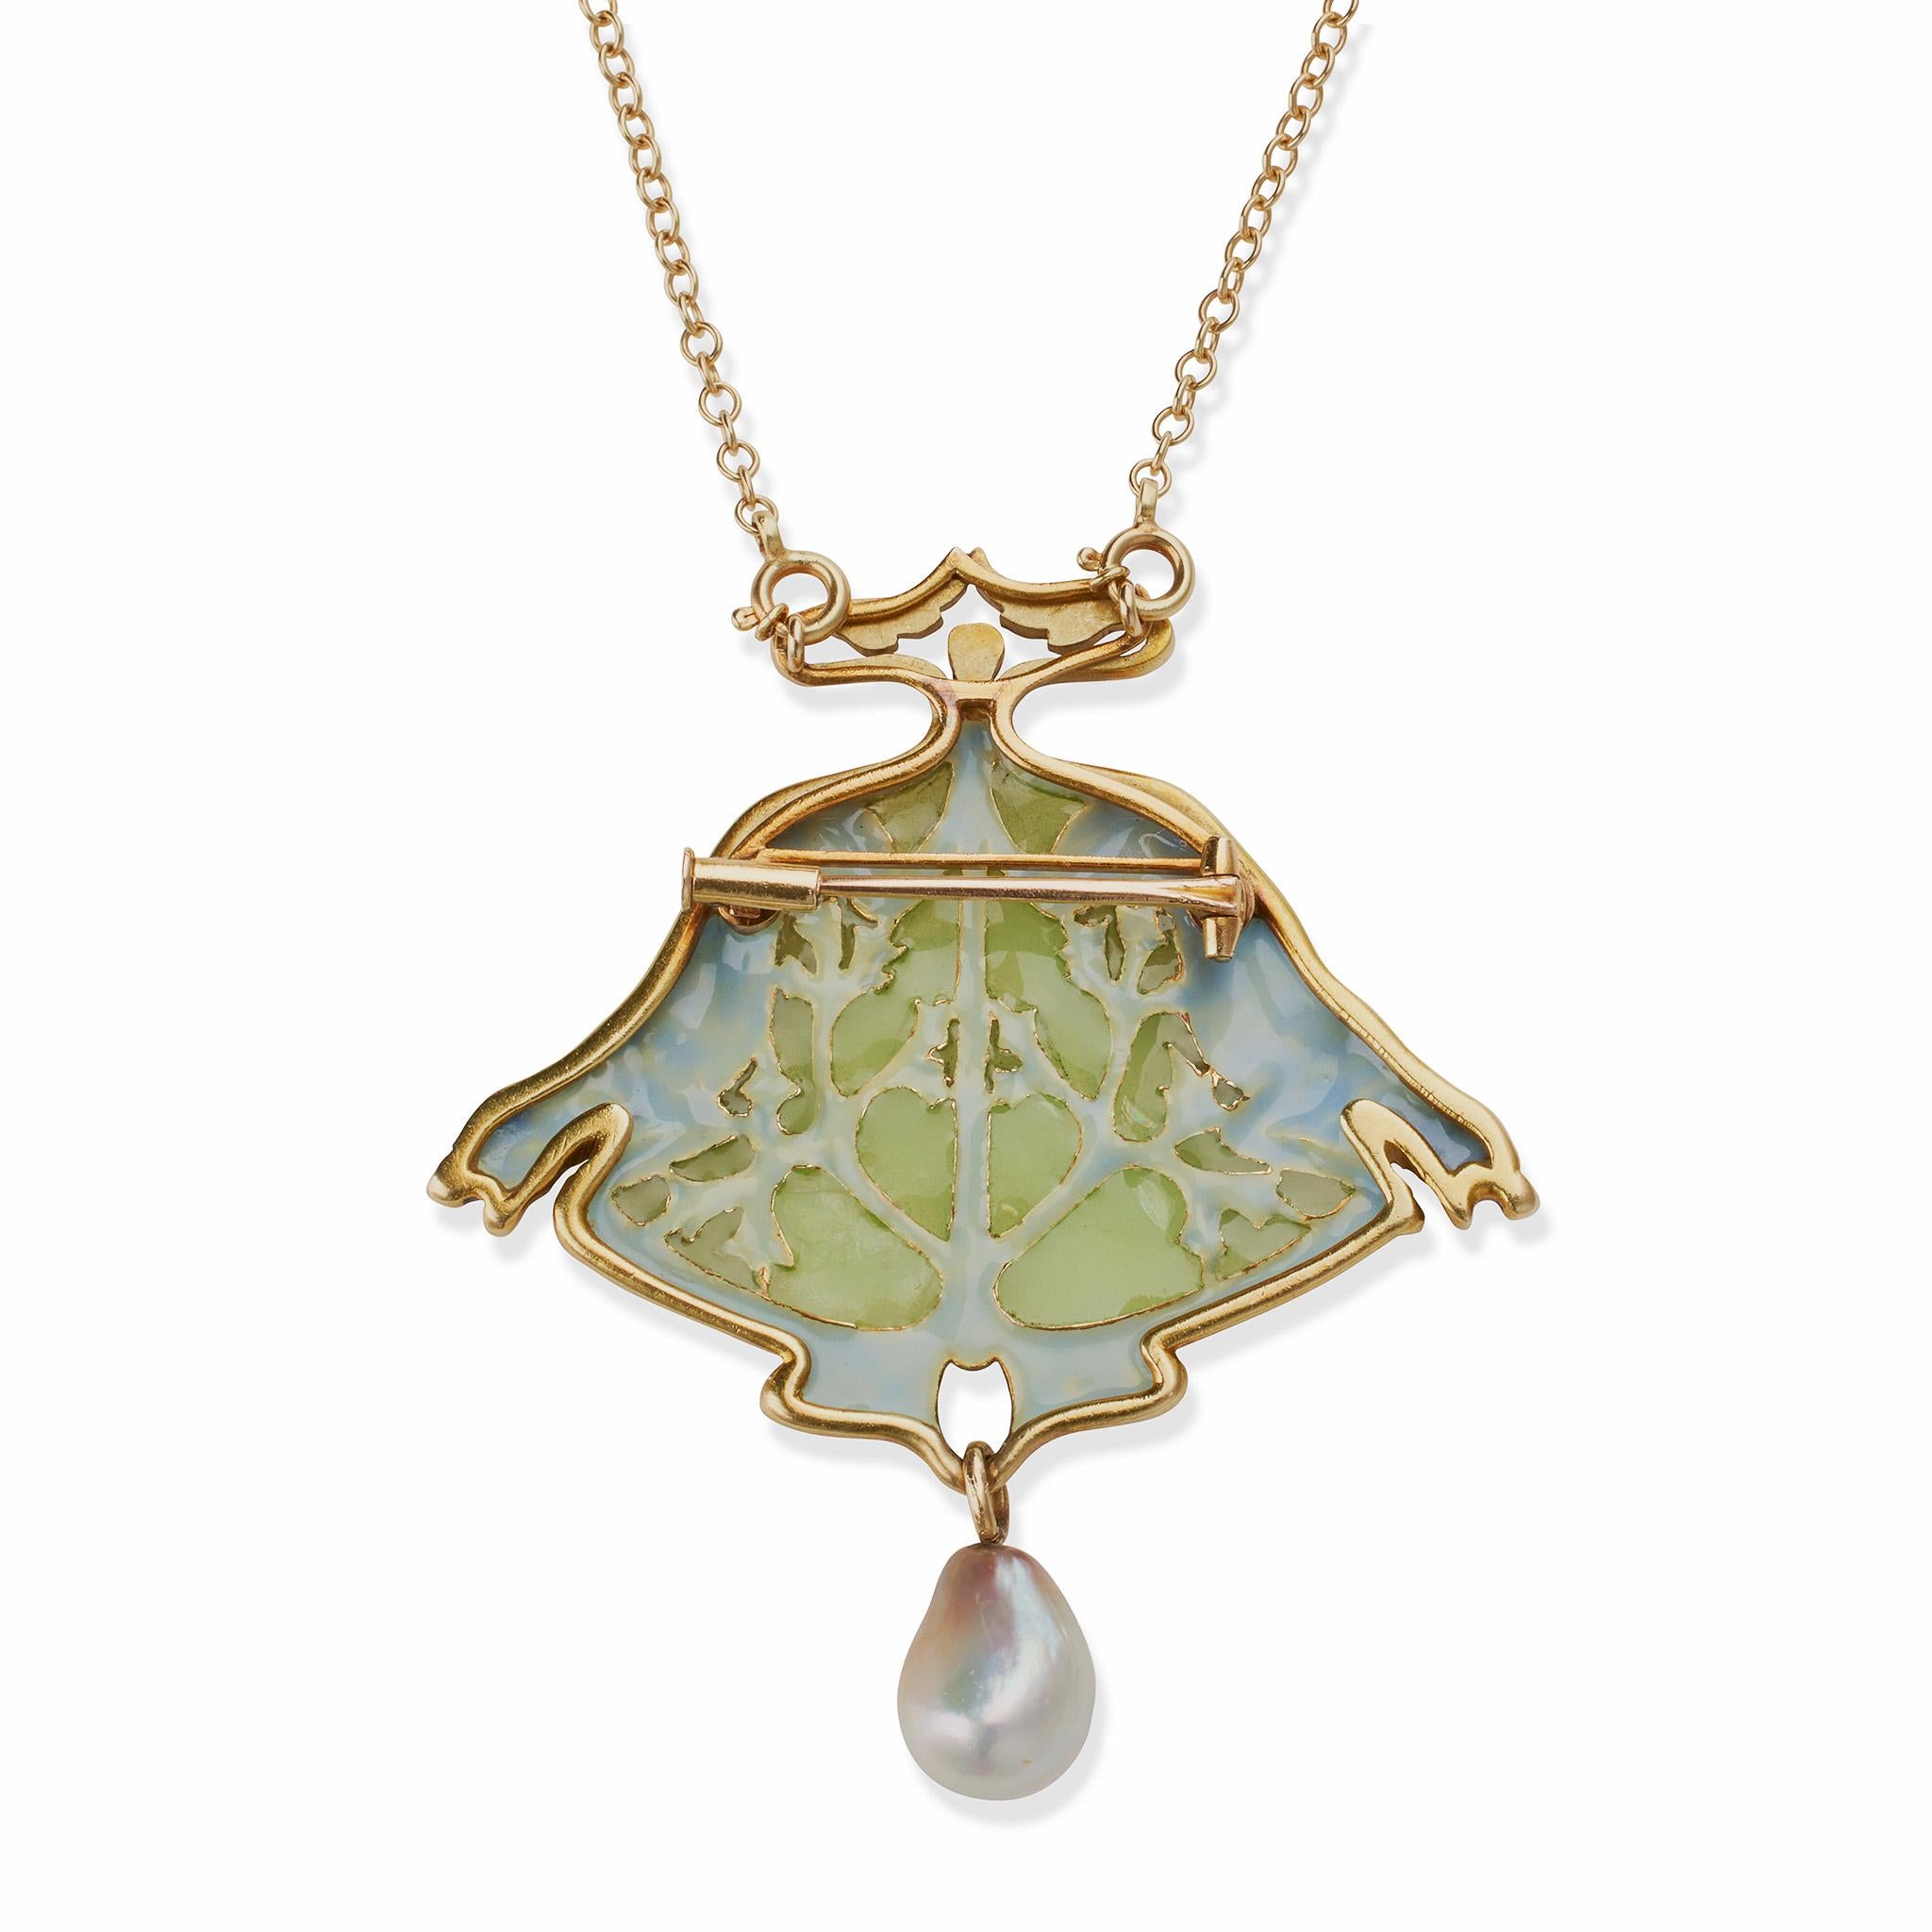 Likely created circa 1903-1907, this plique-à-jour enamel and natural pearl pendant brooch with chain by René Lalique is set in 18K gold. The modified triangular form, composed of chased 18K gold, centers two stalks of seaweed among pale green